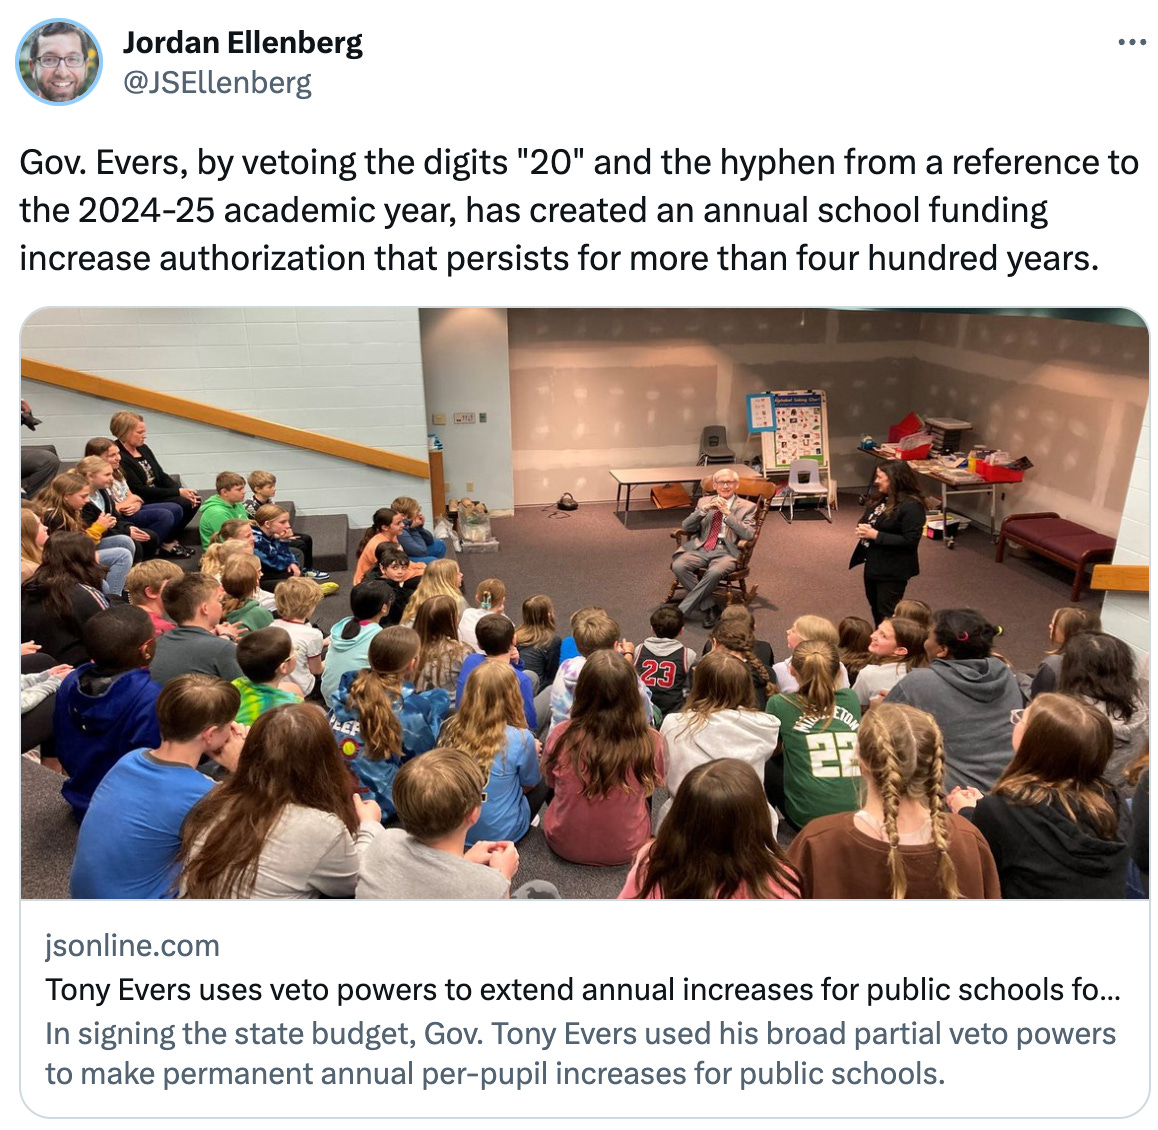  See new Tweets Conversation Jordan Ellenberg @JSEllenberg Gov. Evers, by vetoing the digits "20" and the hyphen from a reference to the 2024-25 academic year, has created an annual school funding increase authorization that persists for more than four hundred years. jsonline.com Tony Evers uses veto powers to extend annual increases for public schools for the next four... In signing the state budget, Gov. Tony Evers used his broad partial veto powers to make permanent annual per-pupil increases for public schools.